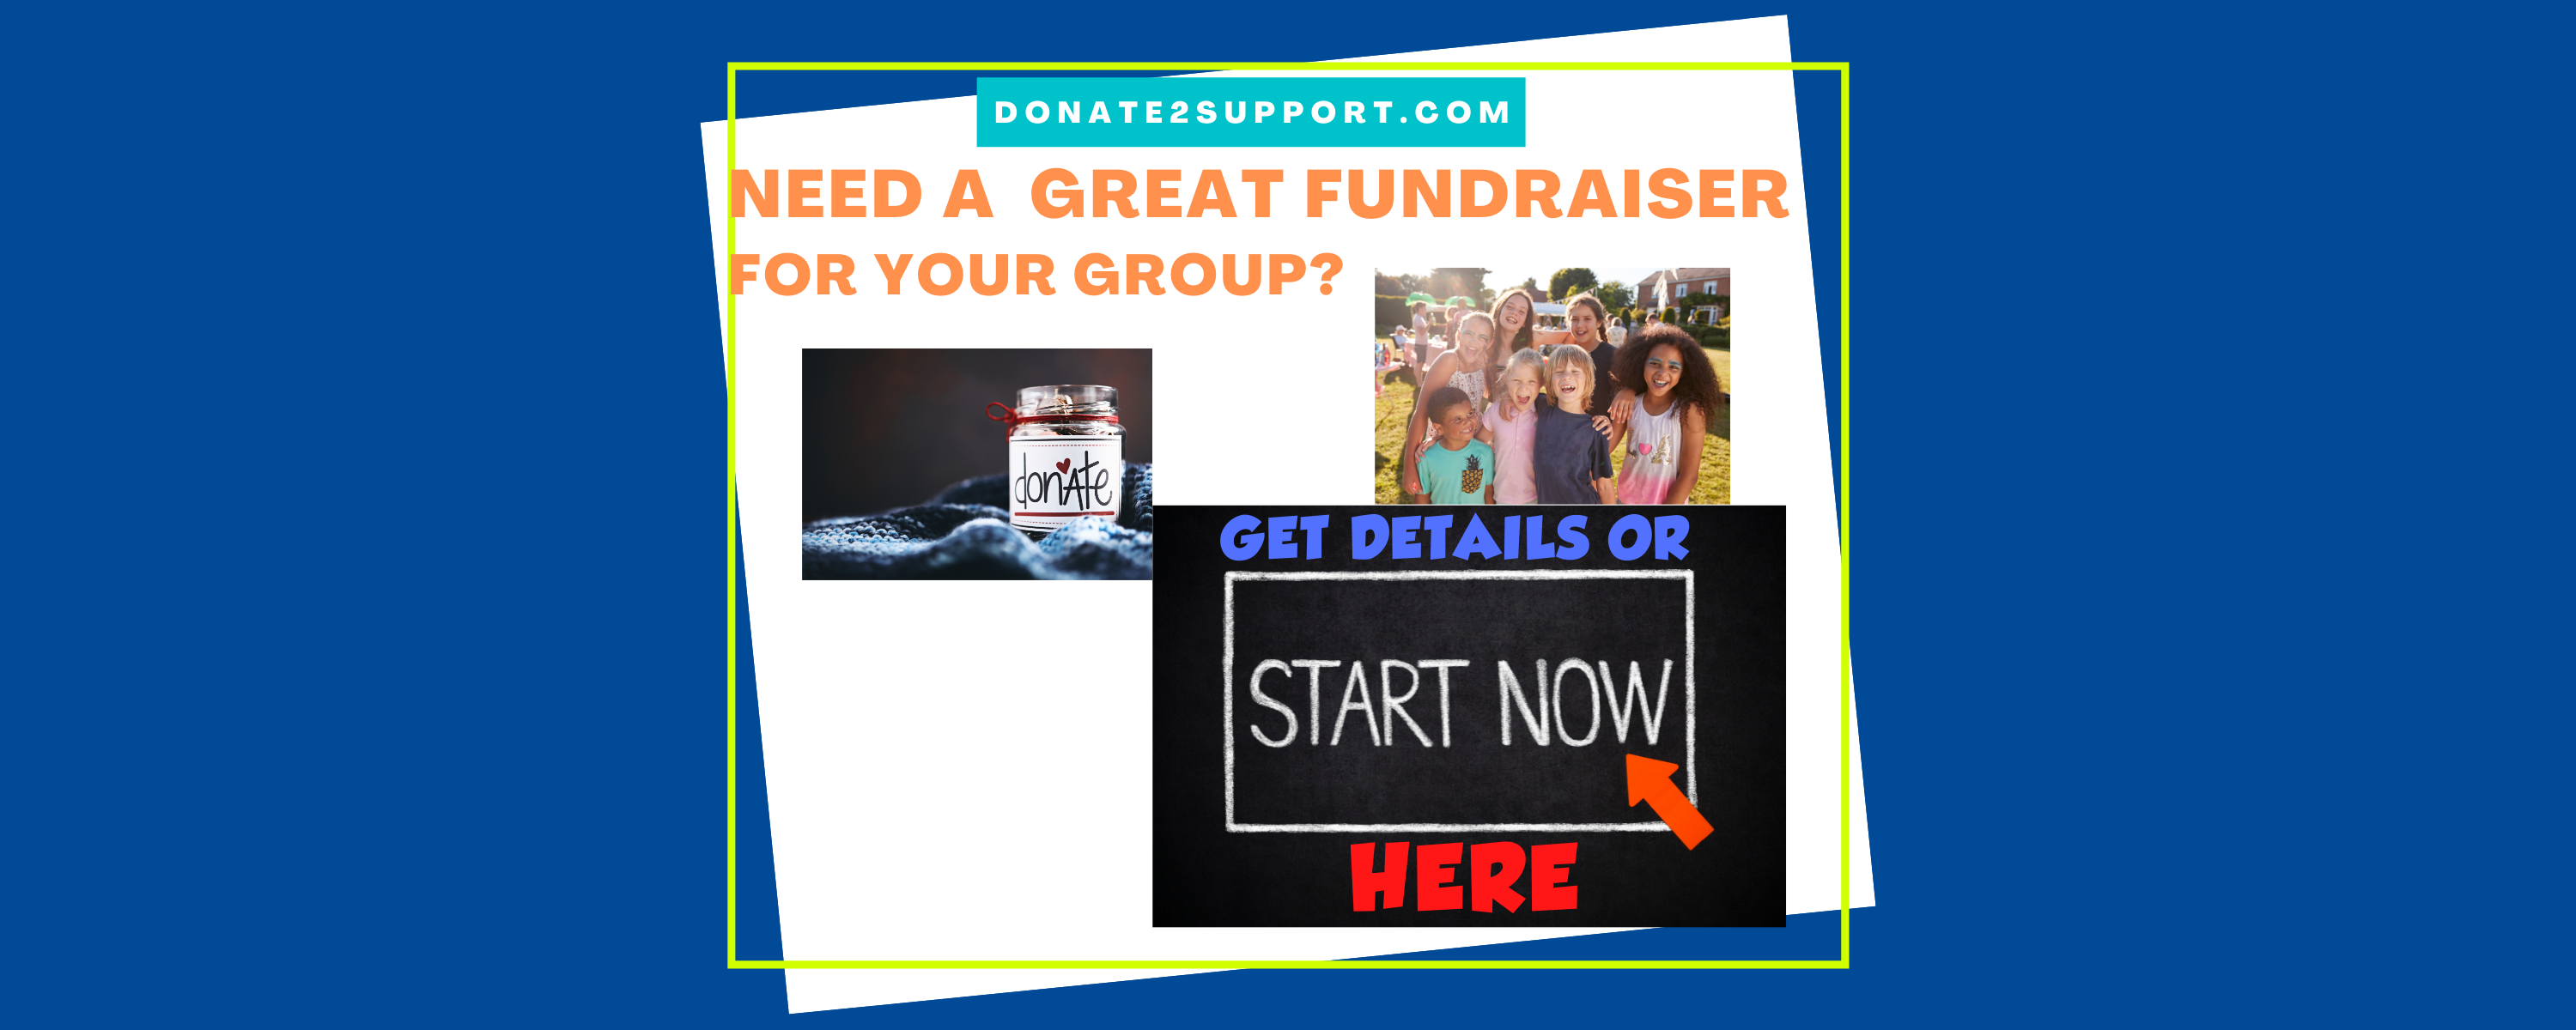 Need A Great Fundraiser For Your Group